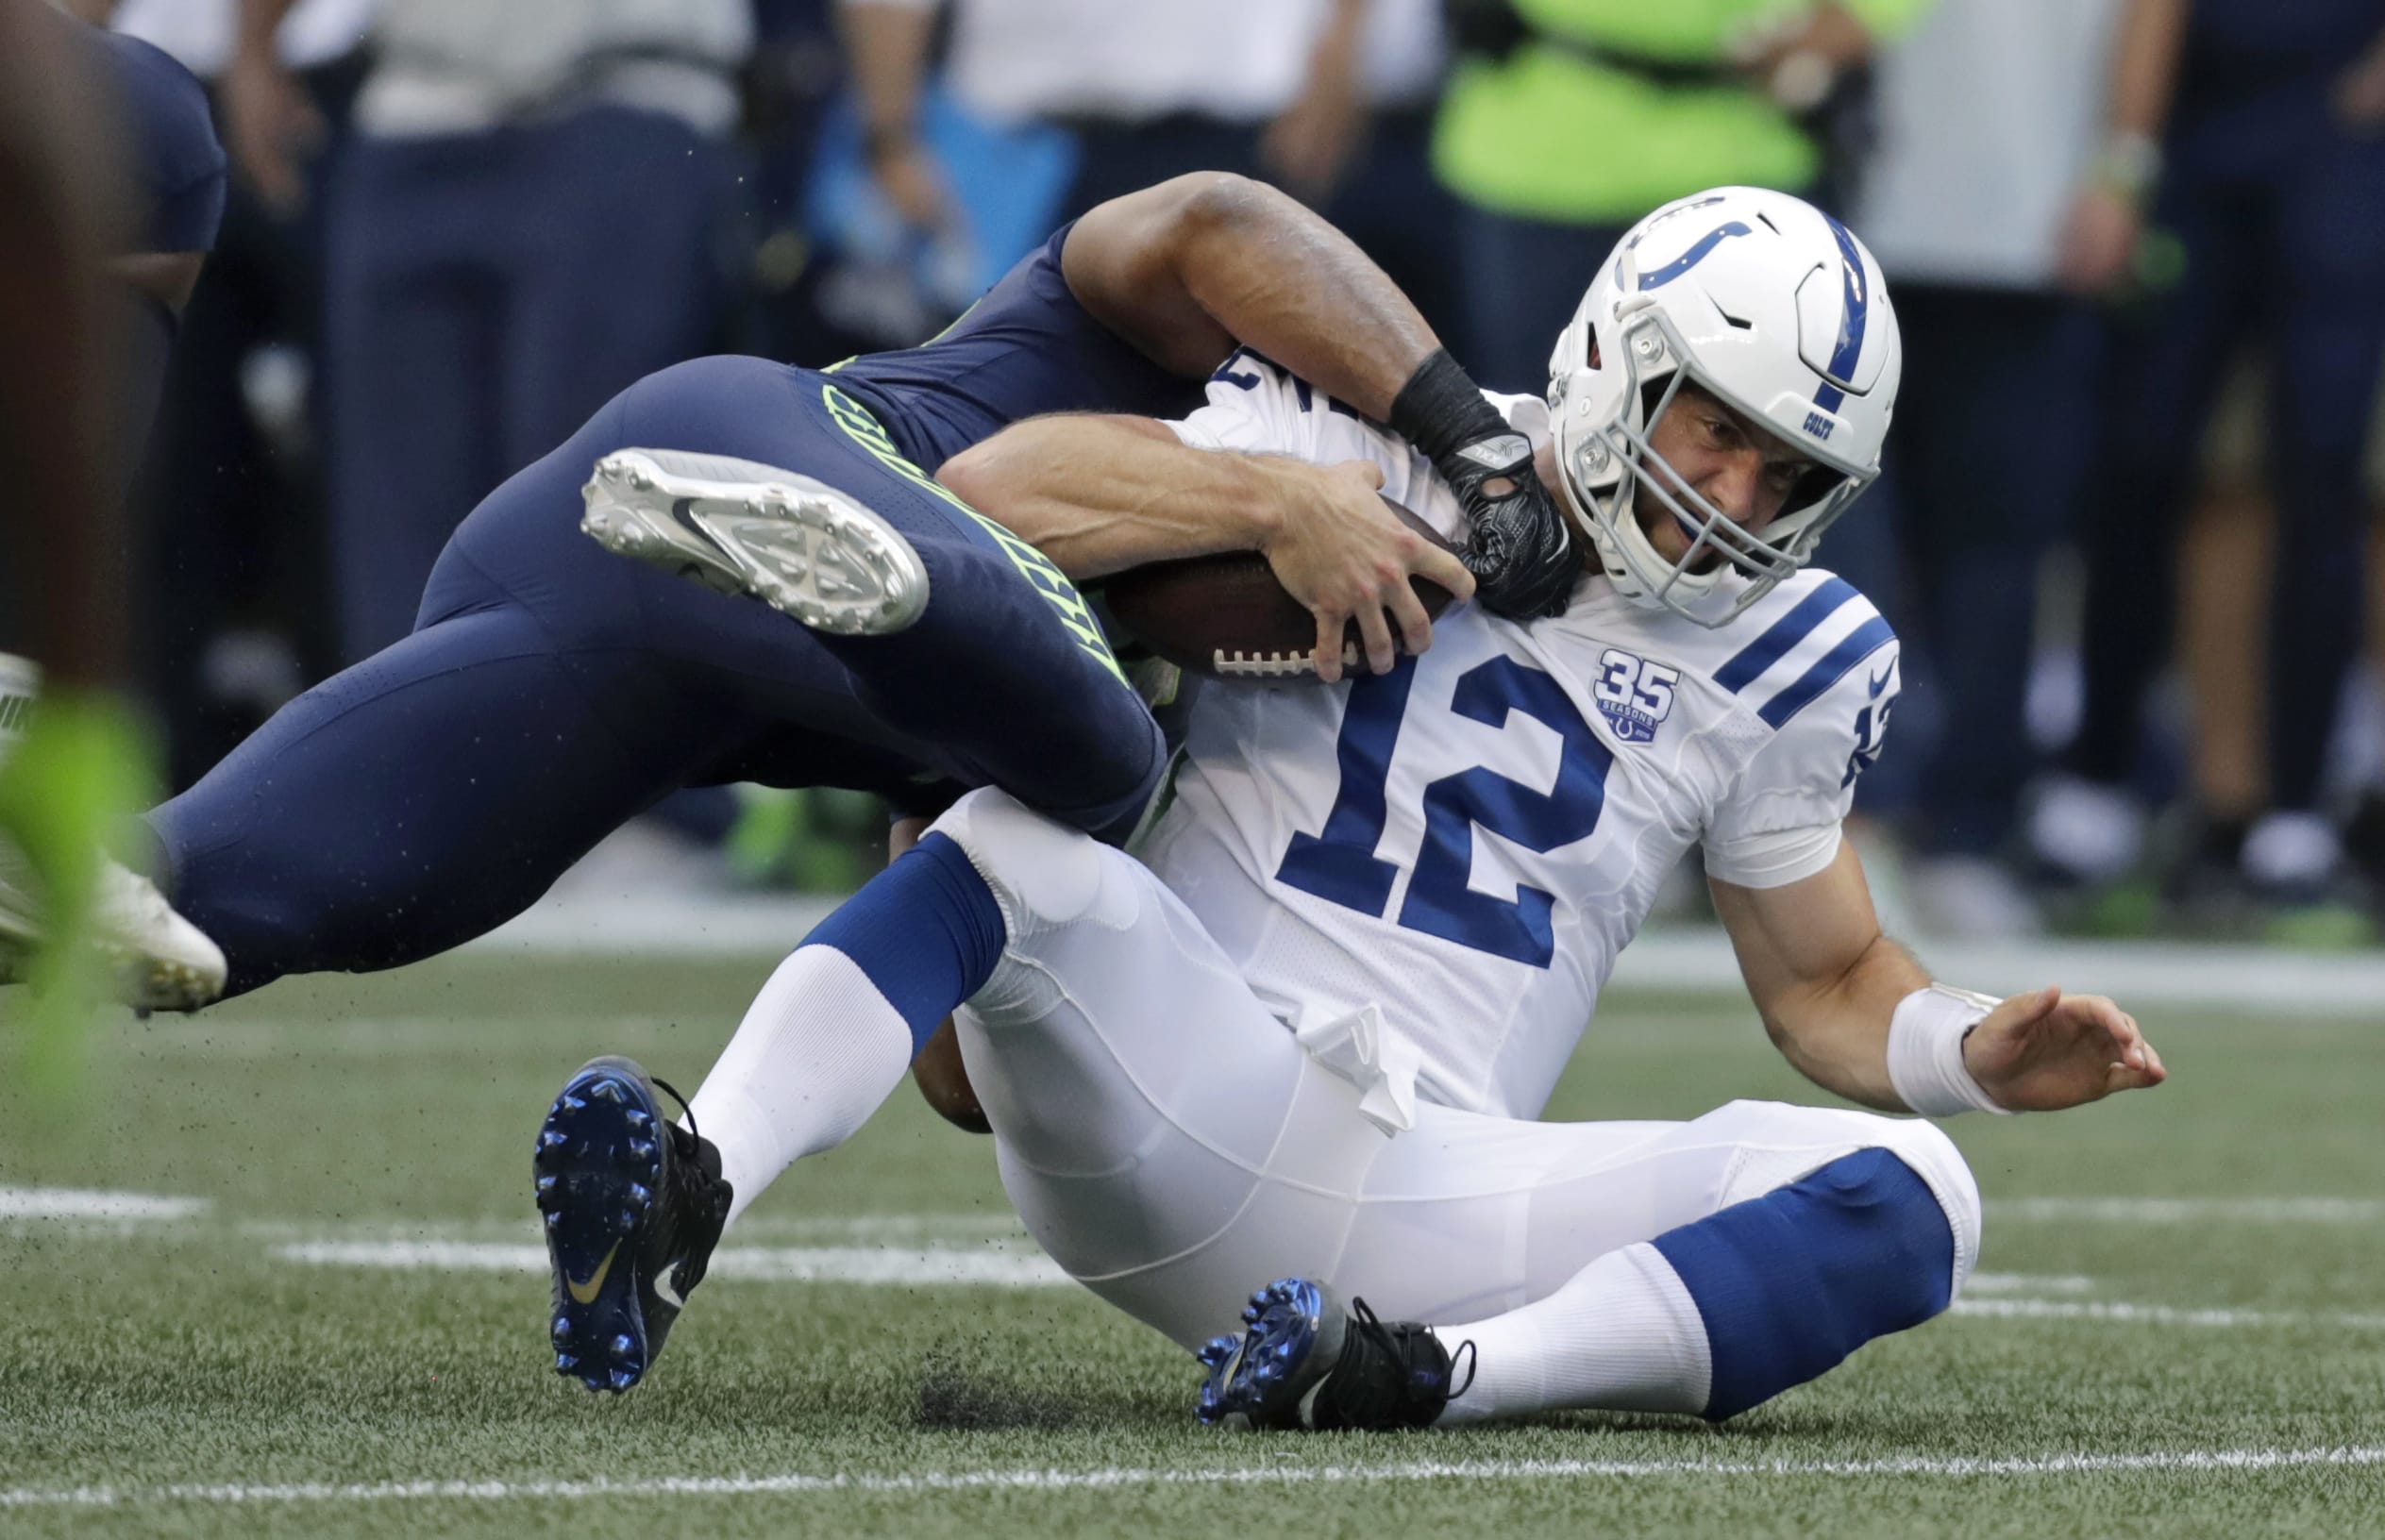 Indianapolis Colts quarterback Andrew Luck (12) is tackled by Seattle Seahawks linebacker Bobby Wagner during the first half of an NFL football preseason game, Thursday, Aug. 9, 2018, in Seattle.